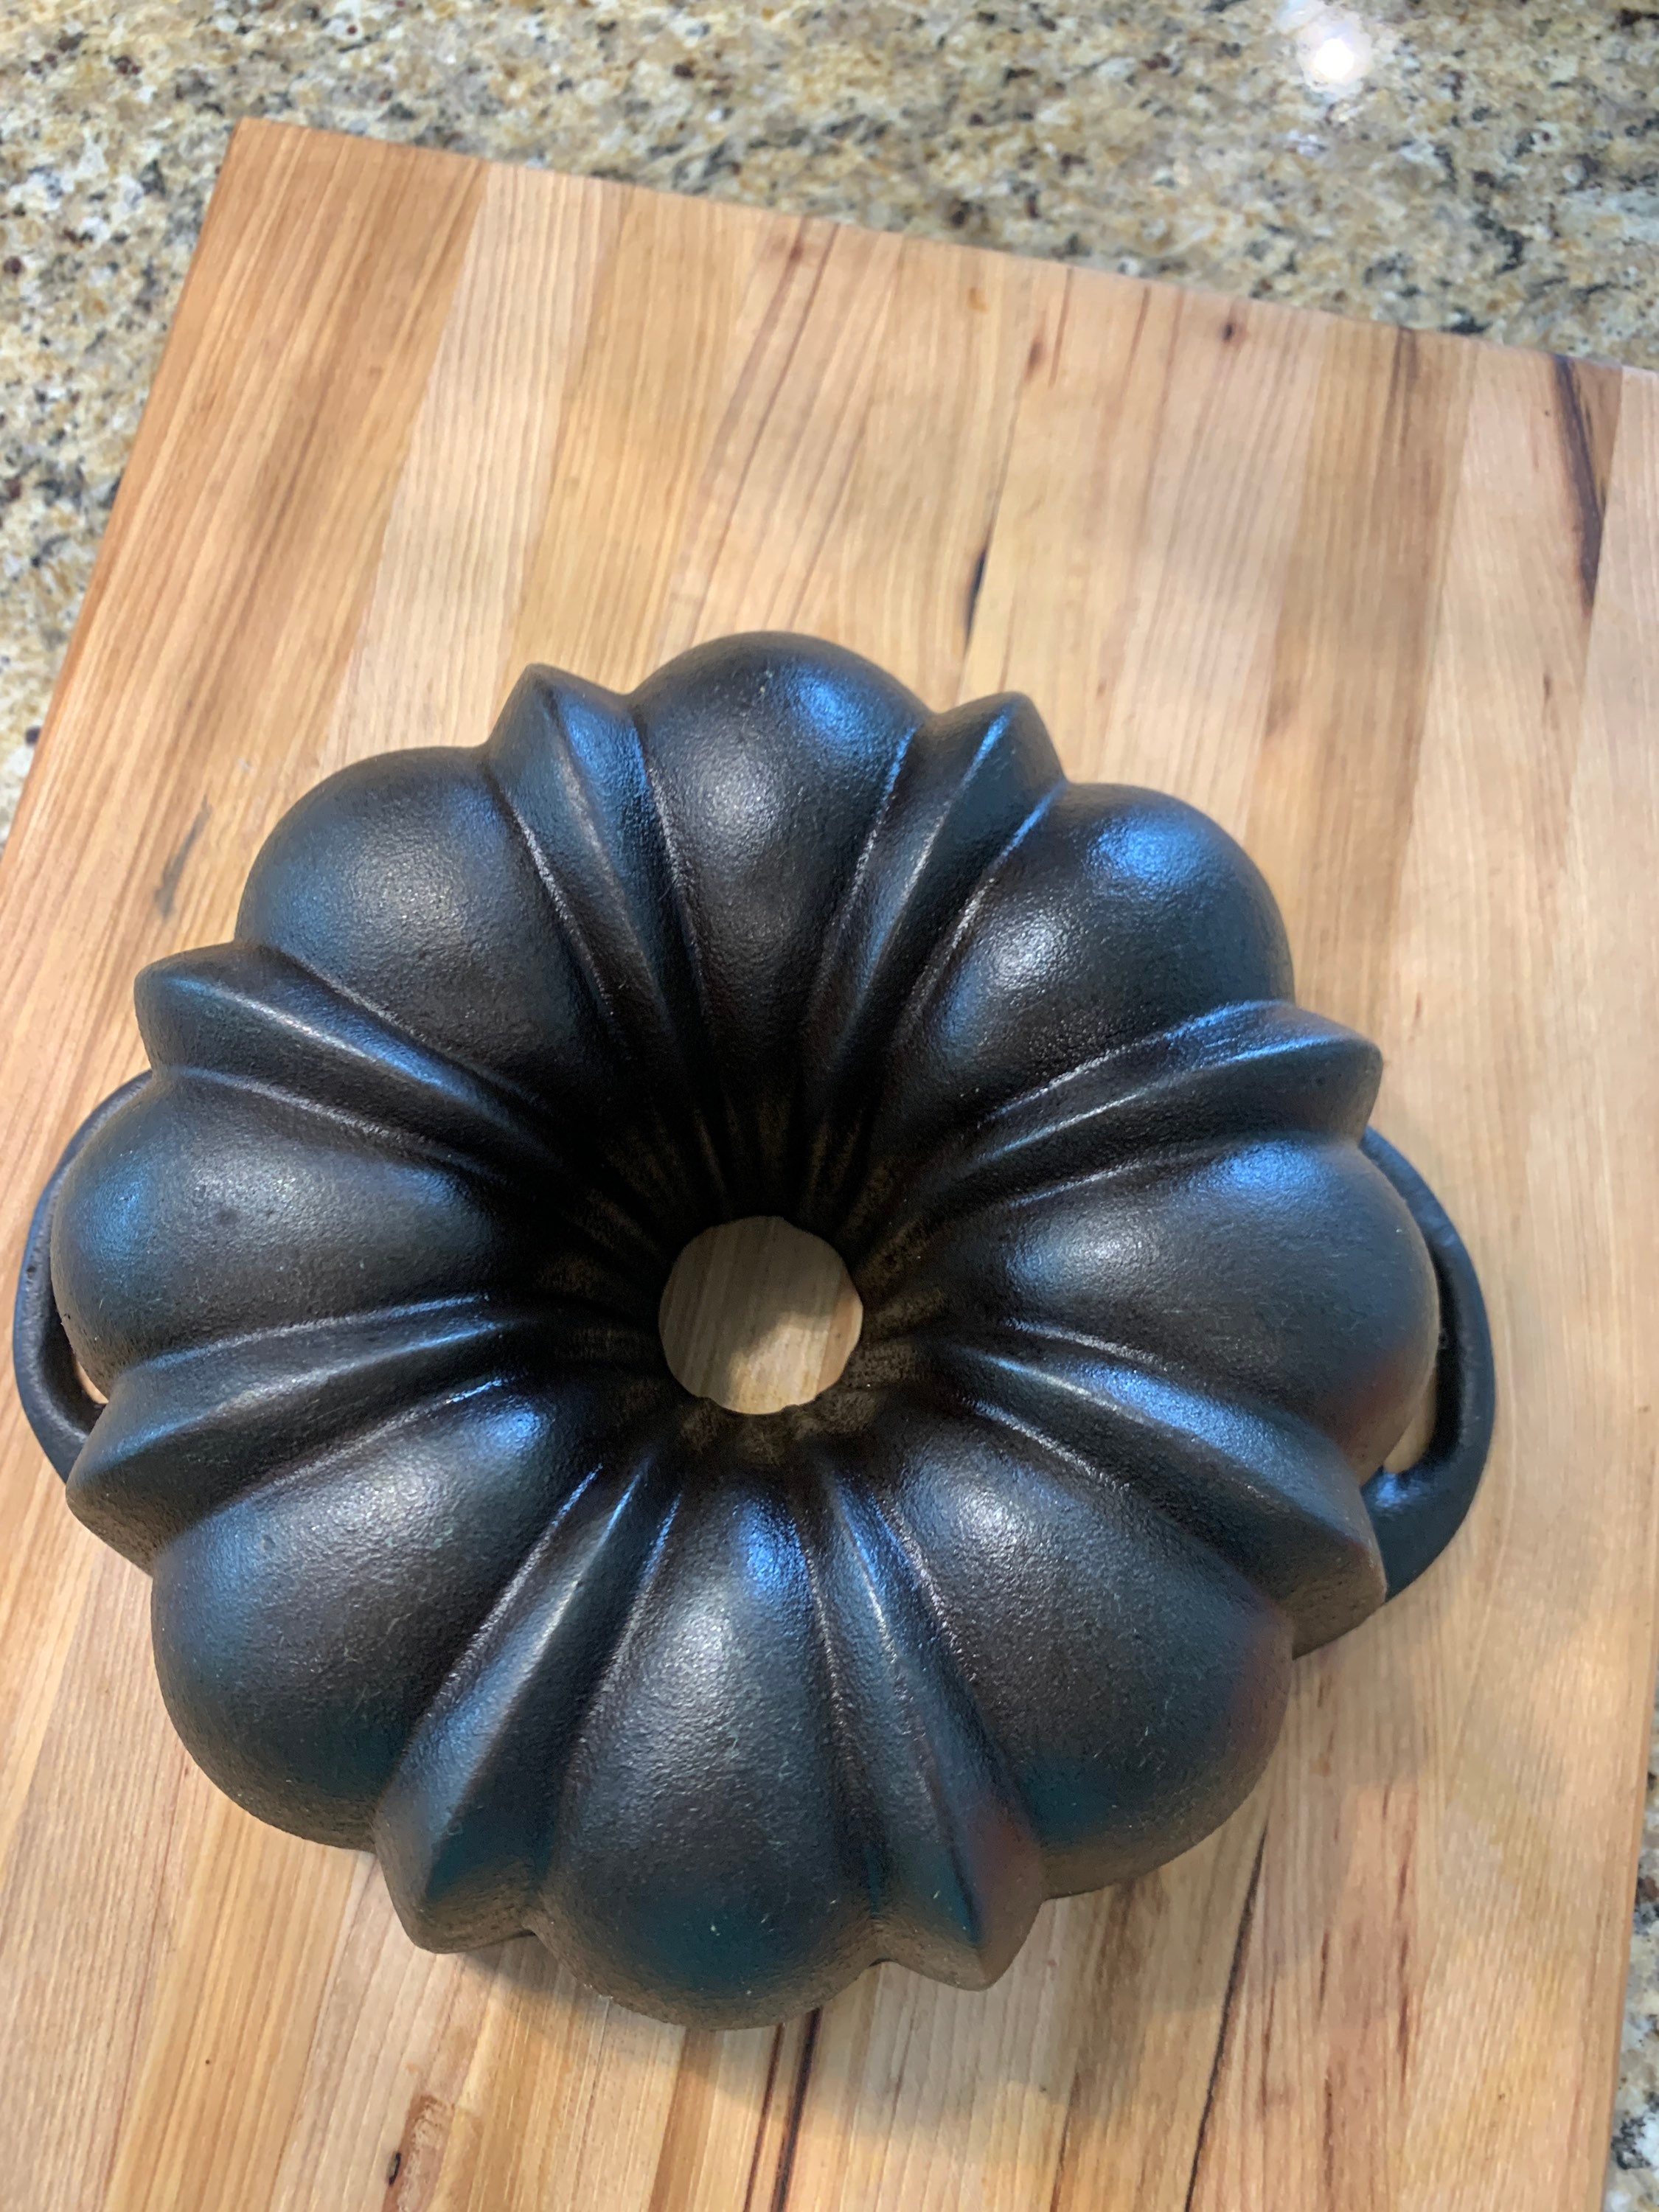 Unmarked Early / Primitive Cast Iron Bundt / Fluted Cake Pan, Restored